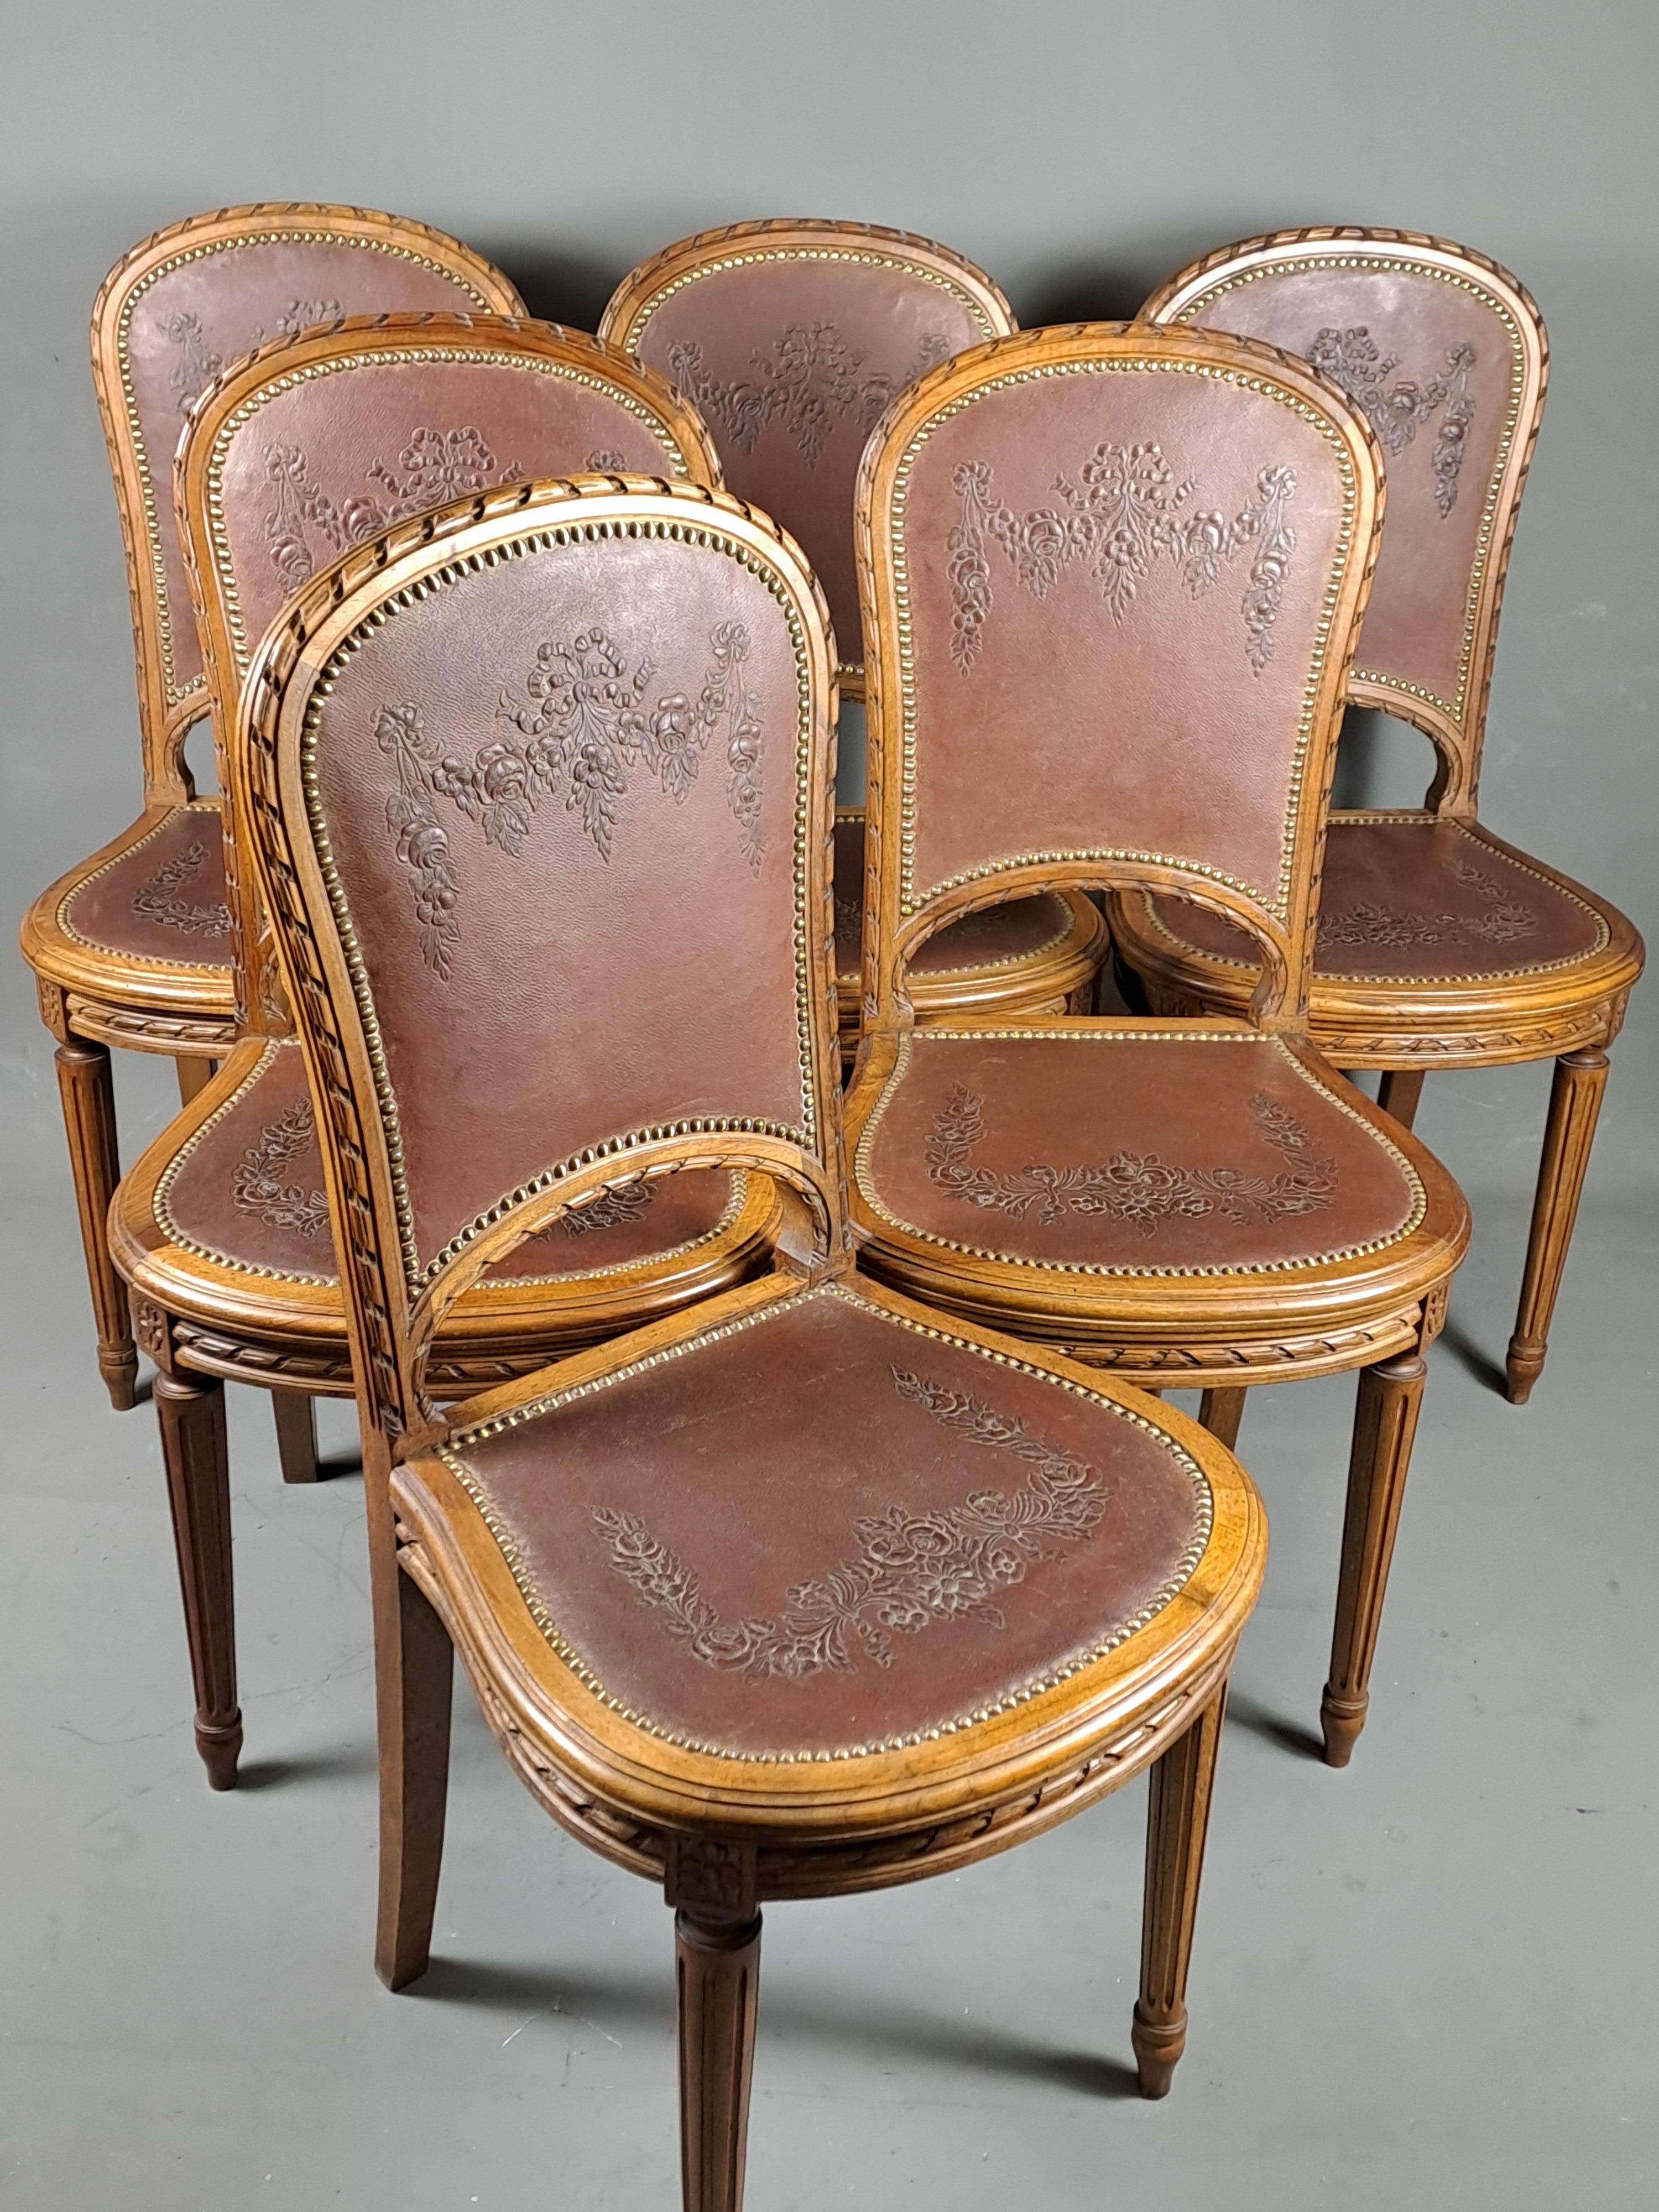 Series Of 6 Louis XVI Style Chairs In Solid Walnut And Embossed Cordoba Leather  2